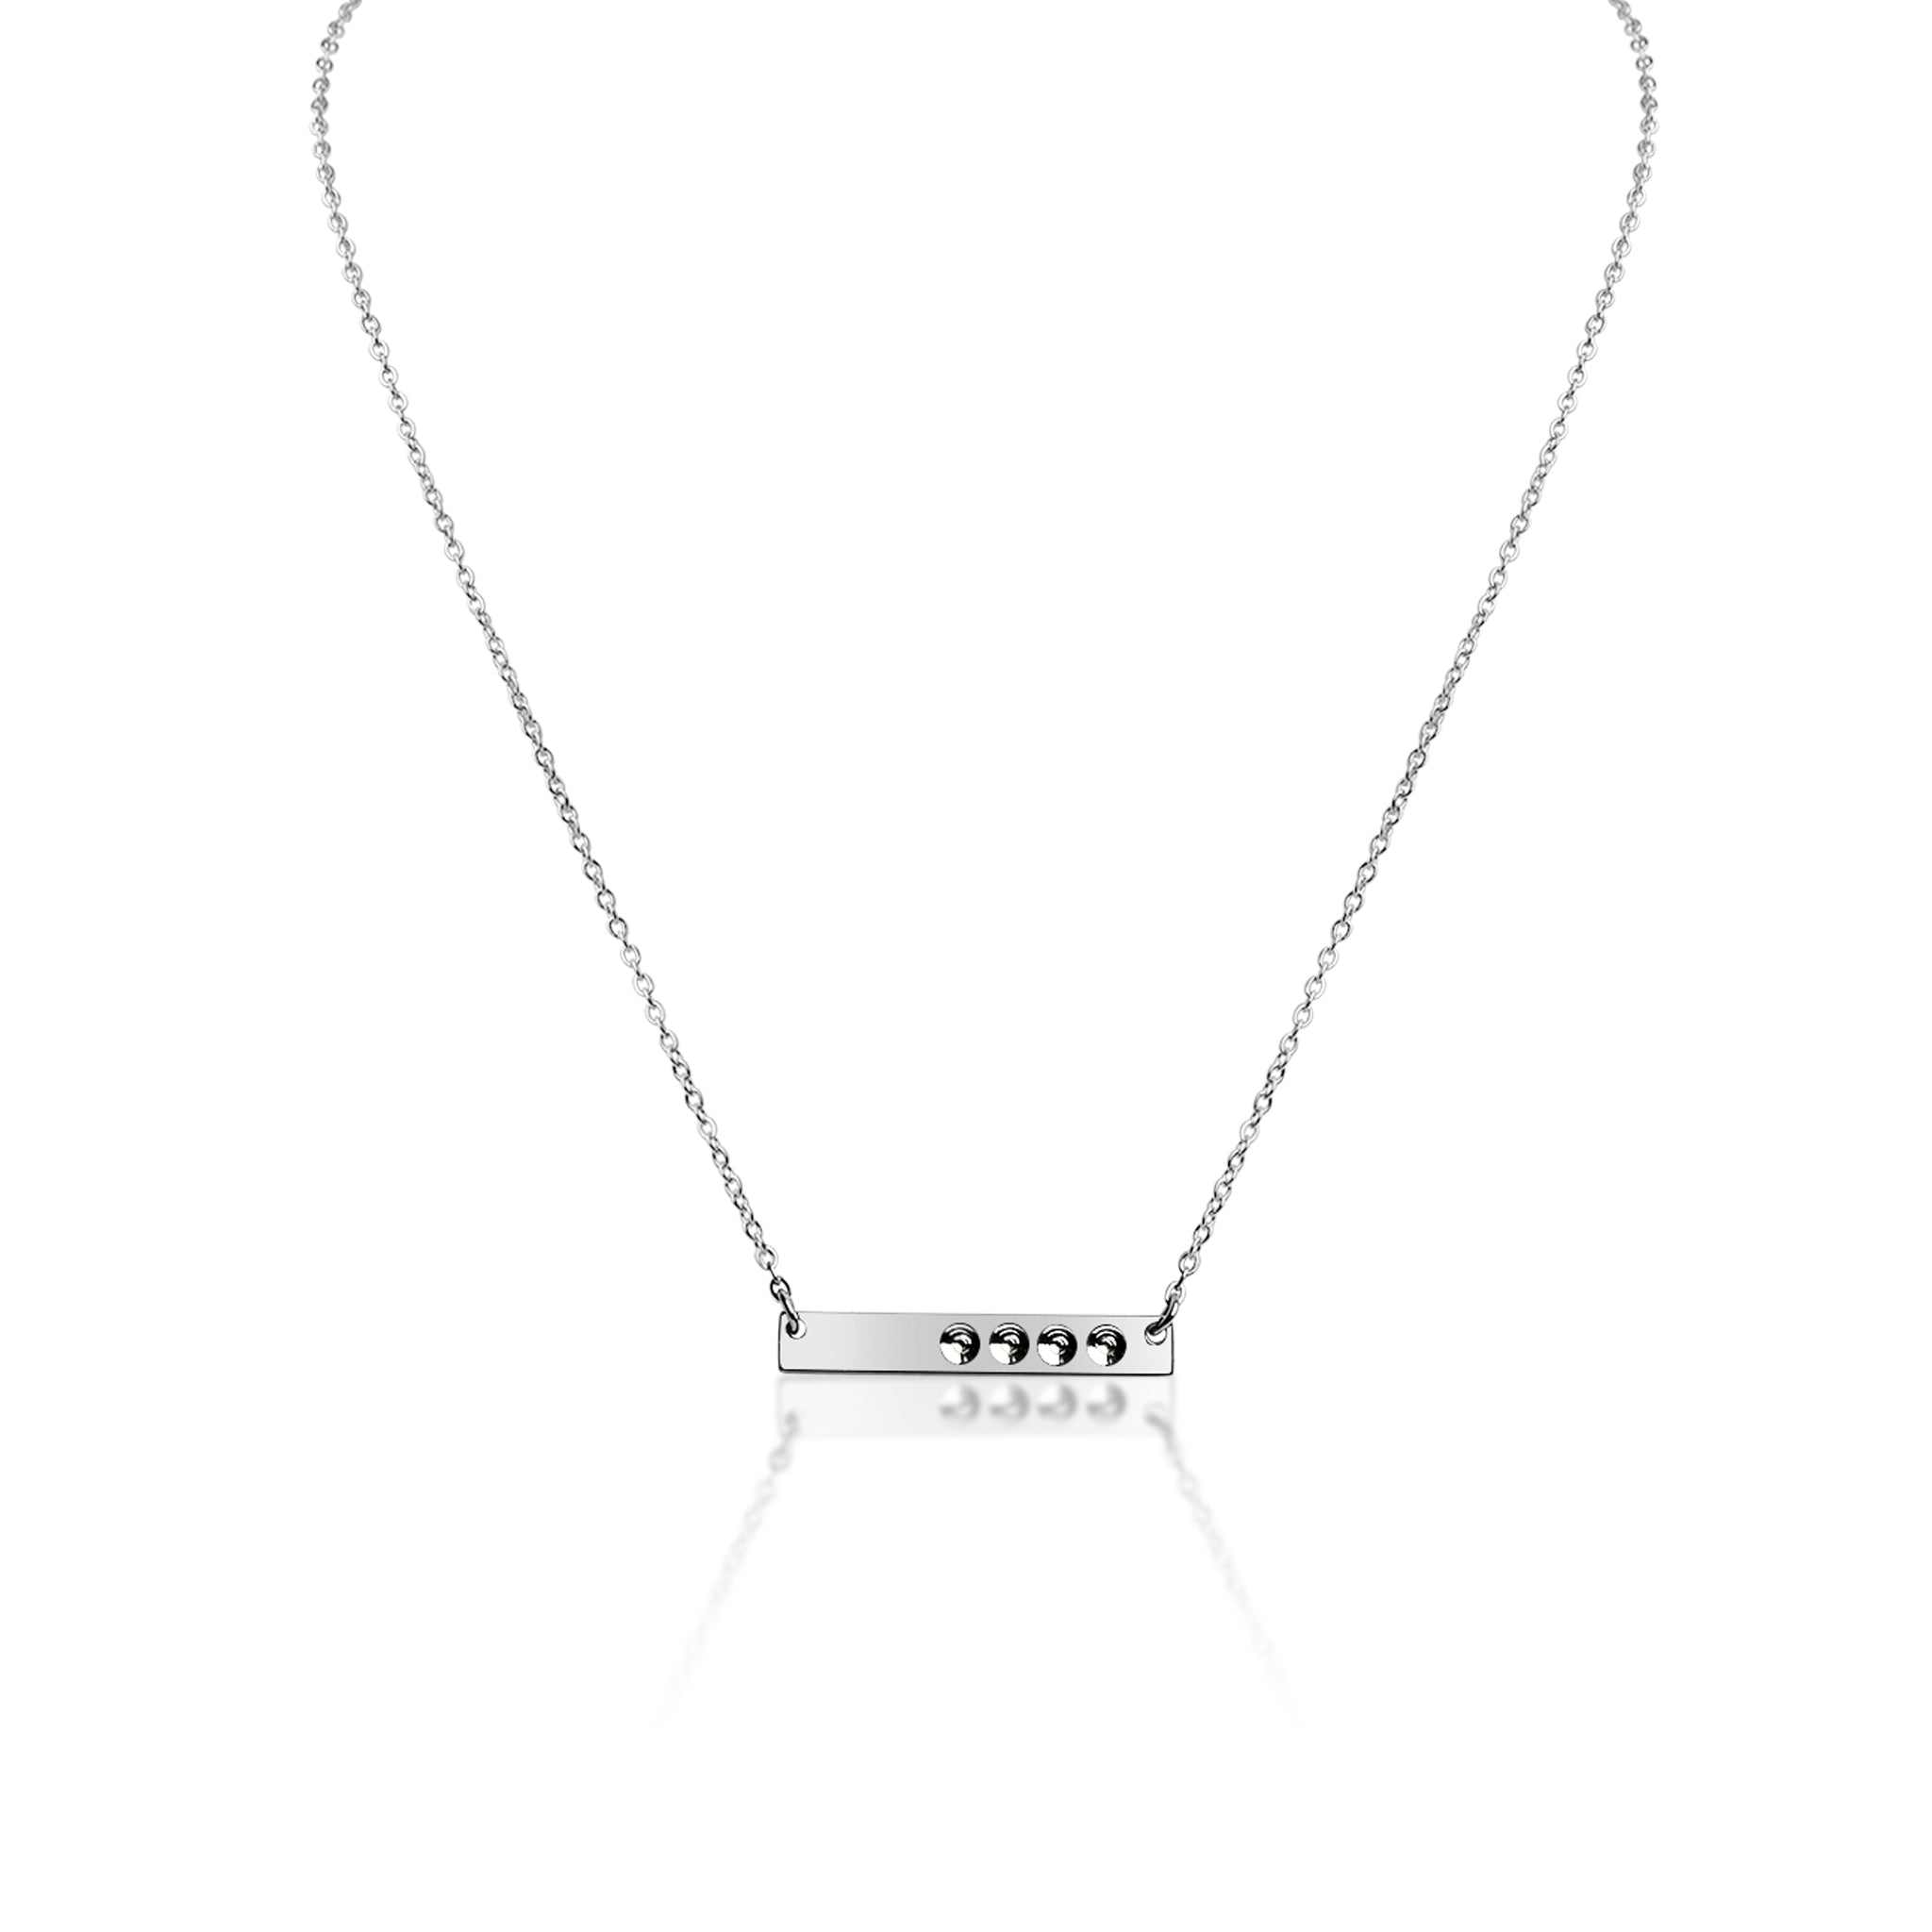 Polished Stainless Steel Stampable Necklace Sbb00114 | Wholesale ...